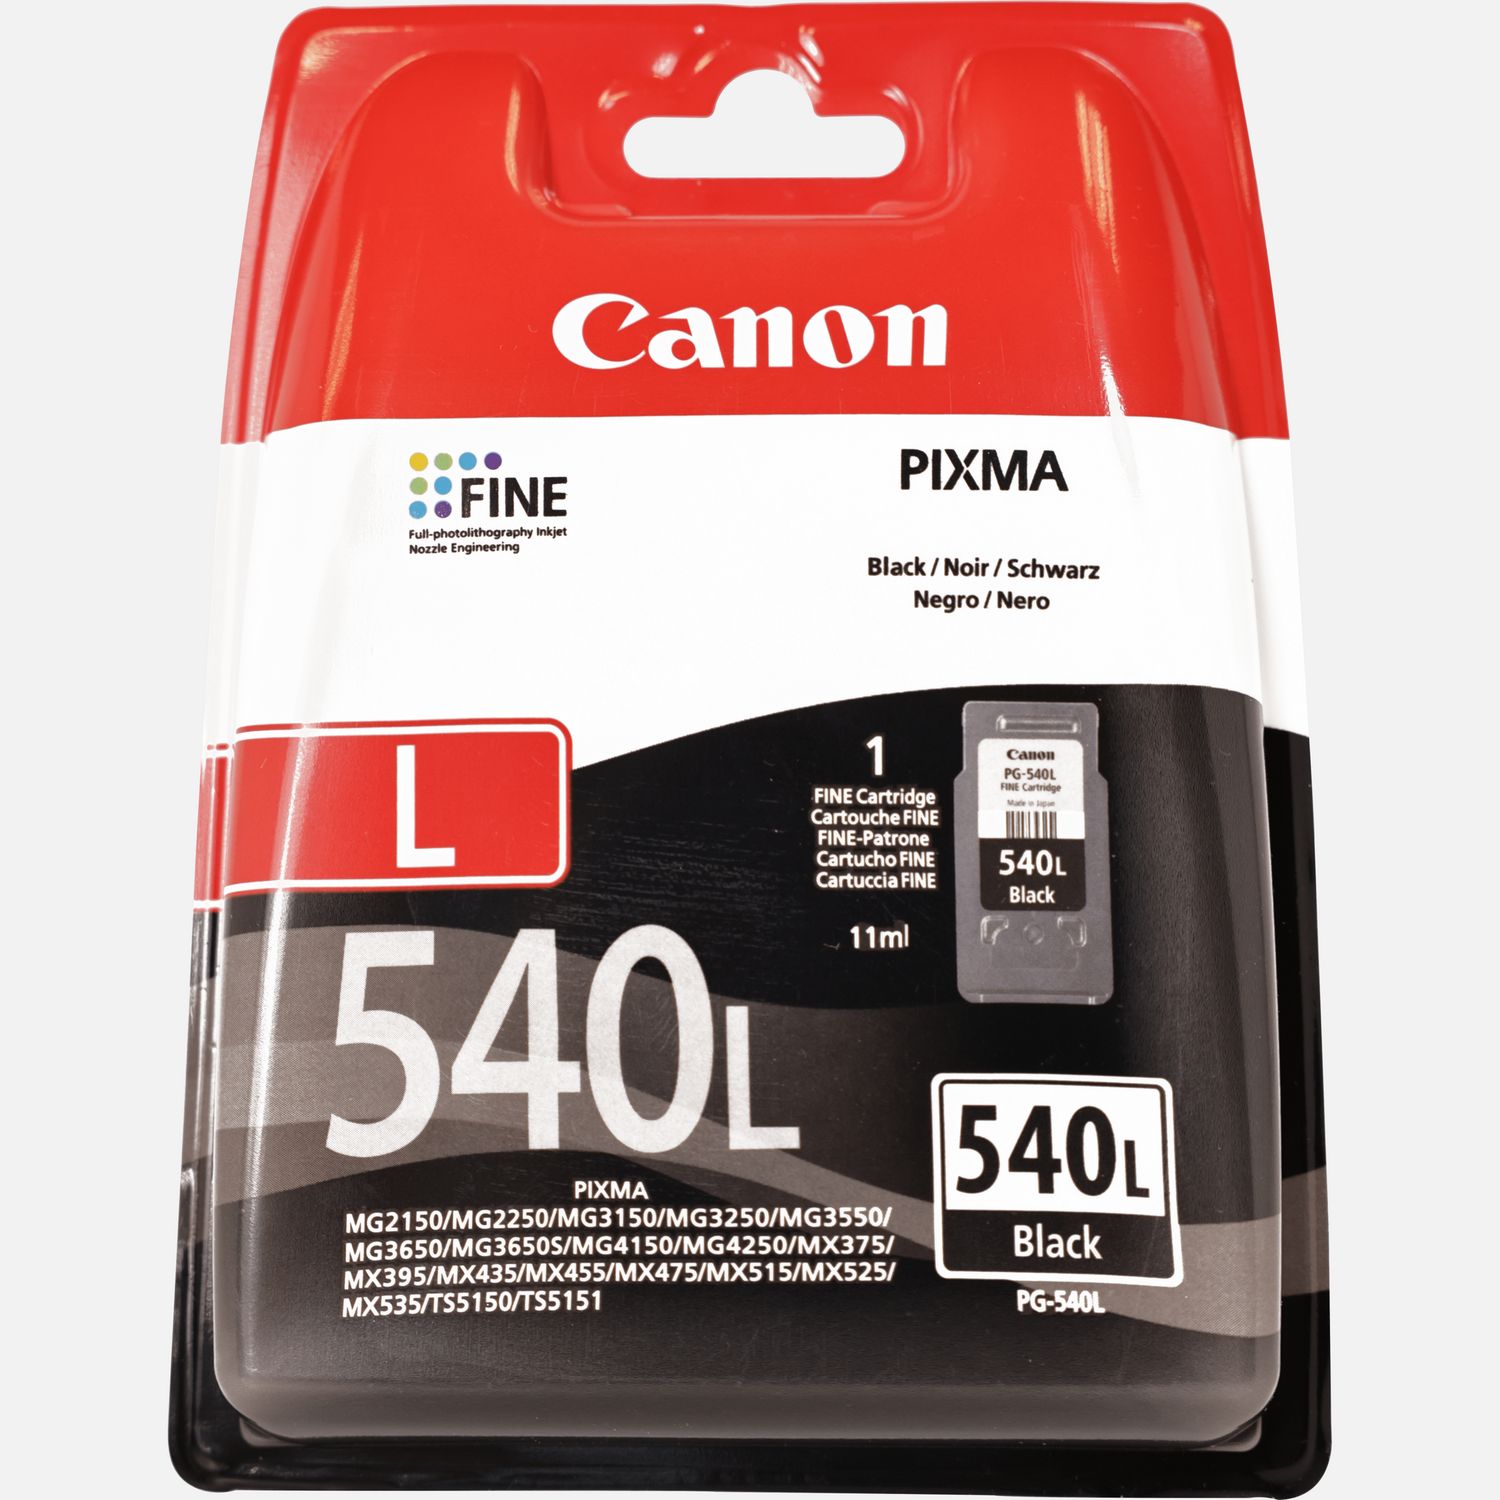 How to replace the Canon Pixma printer cartridge - TS5150 